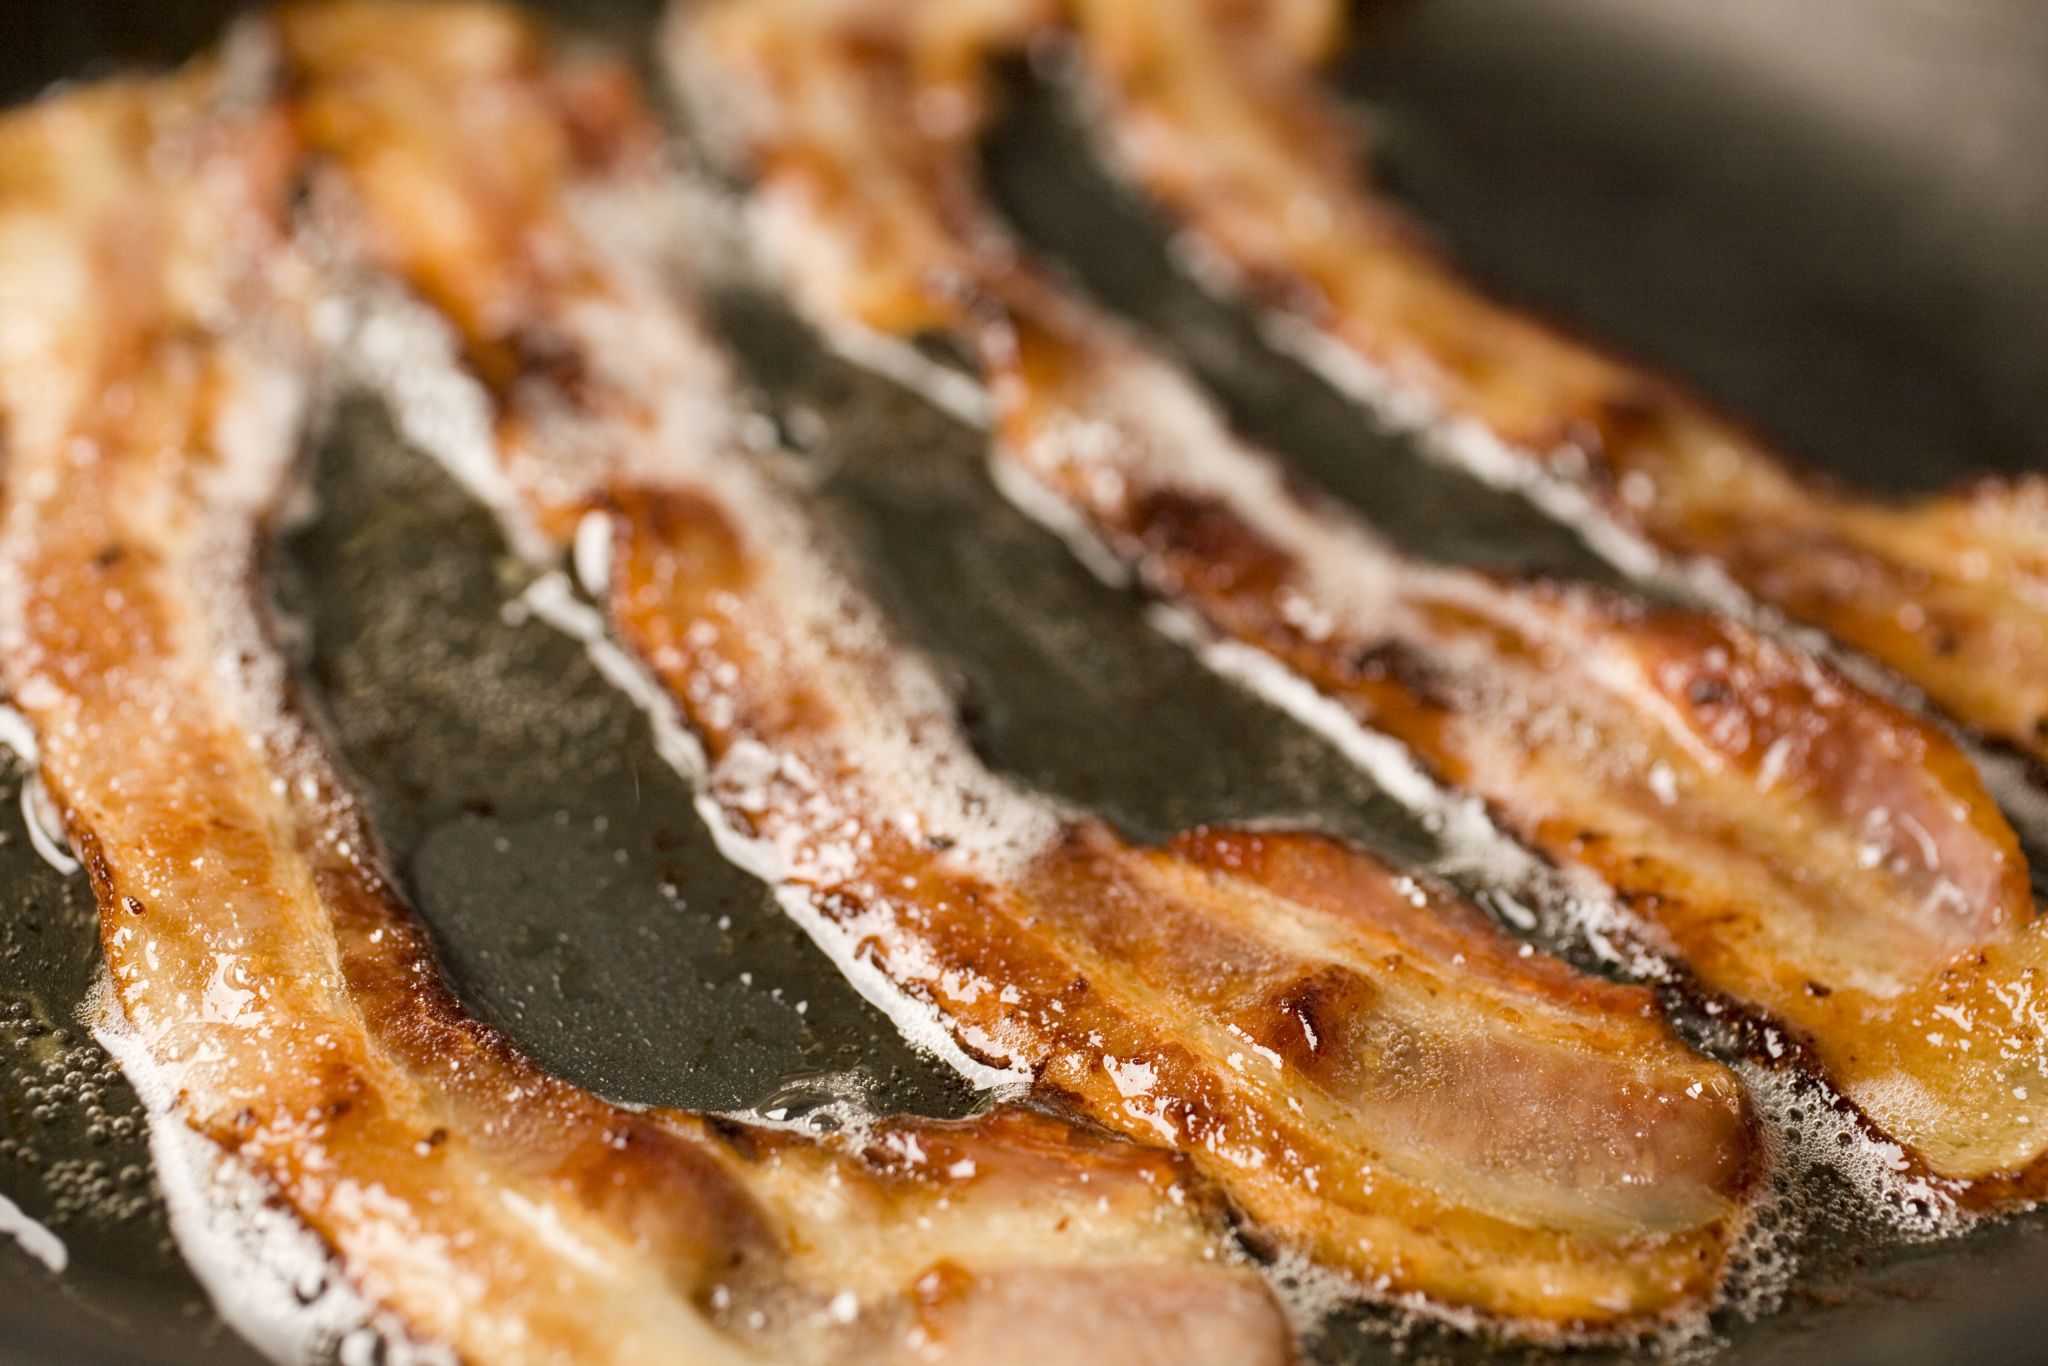 Celebrate International Bacon Day with the best bacon dishes in SF